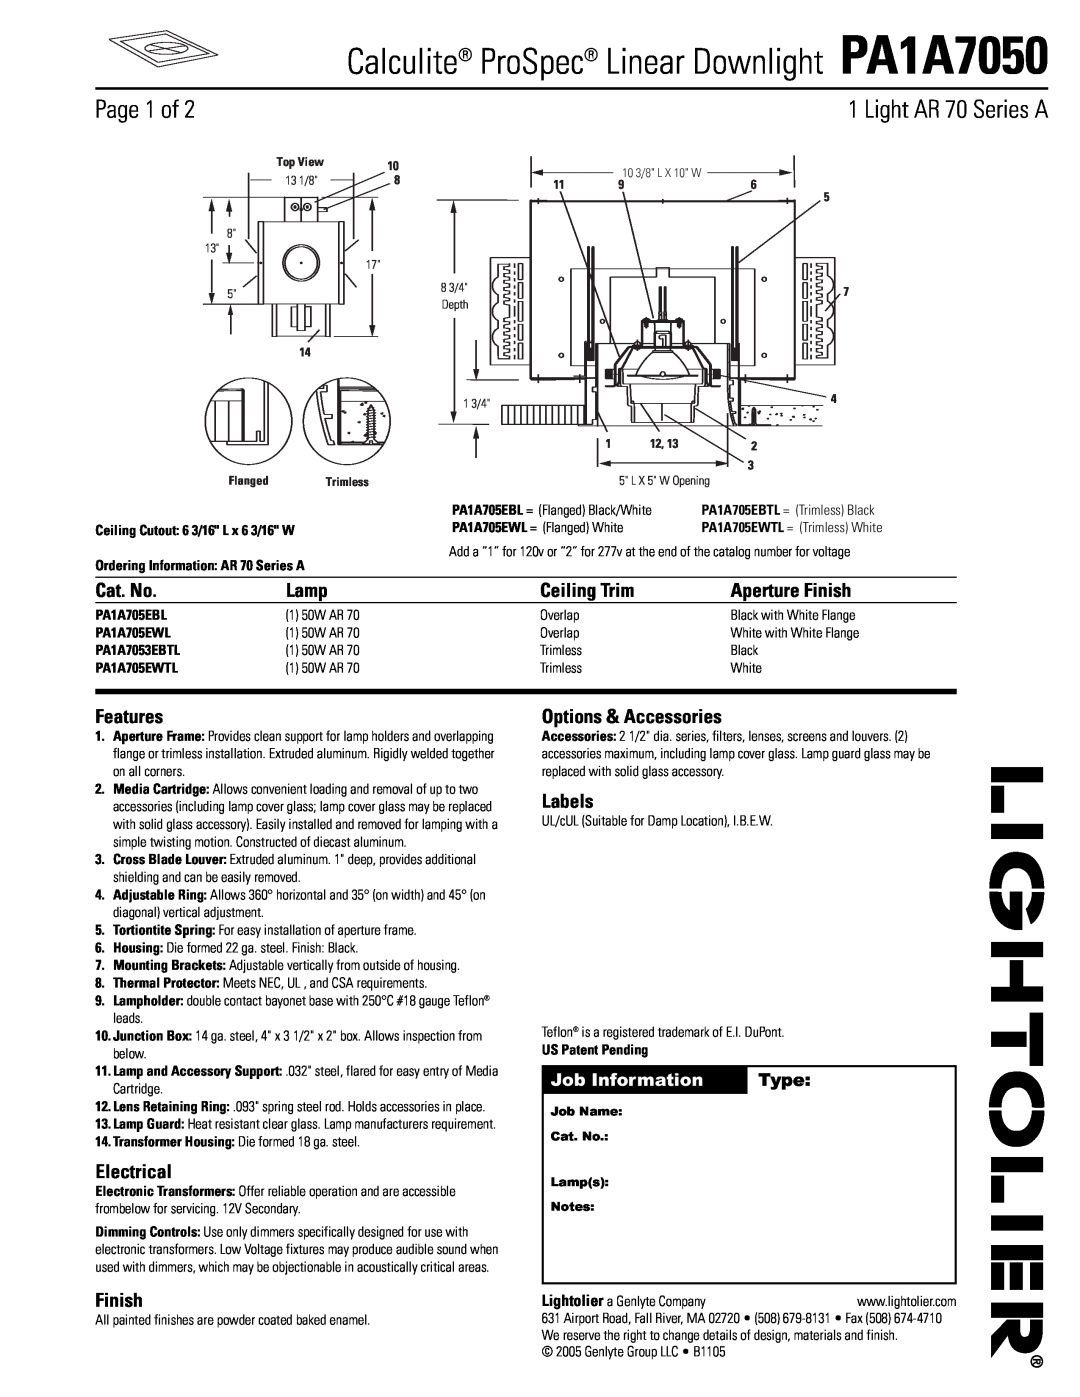 Lightolier manual Calculite ProSpec Linear Downlight PA1A7050, Page 1 of, Light AR 70 Series A, Cat. No, Lamp, Features 